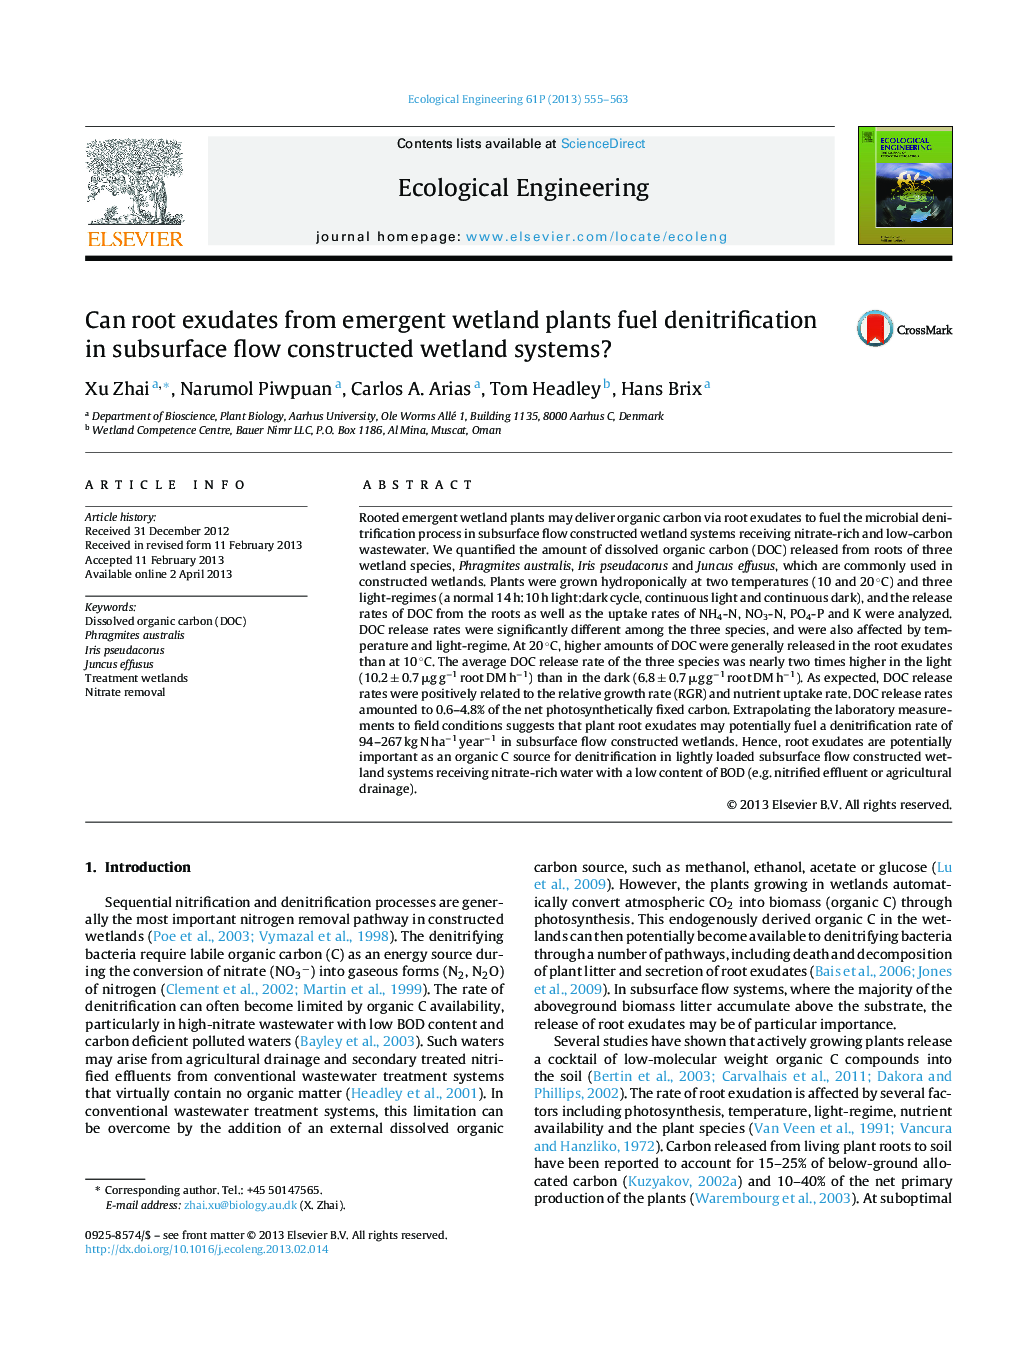 Can root exudates from emergent wetland plants fuel denitrification in subsurface flow constructed wetland systems?